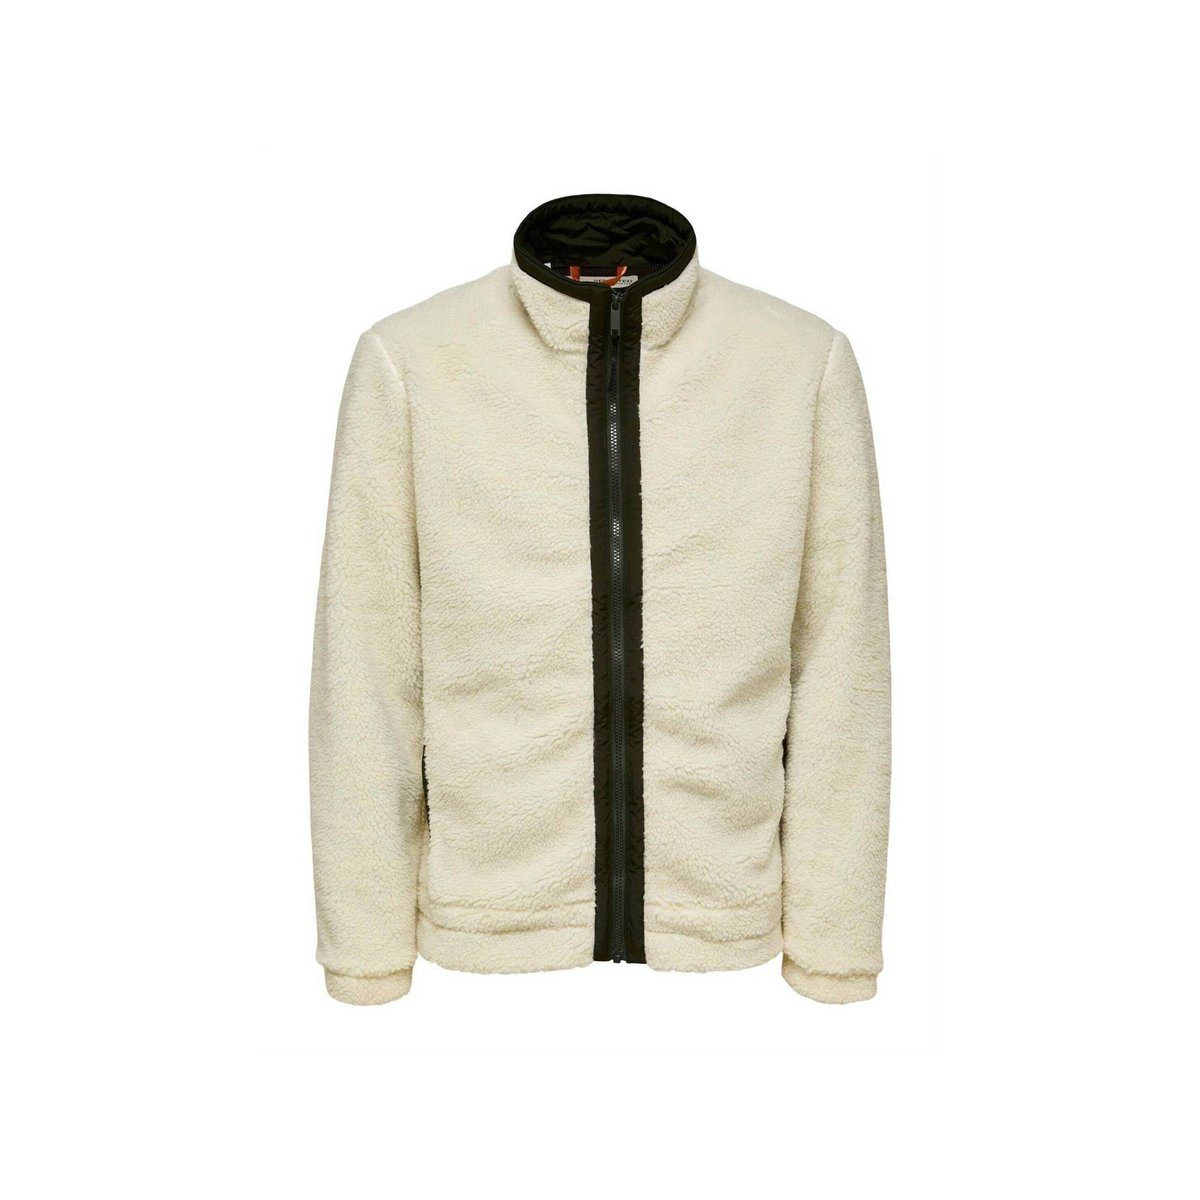 SELECTED HOMME Anorak creme (1-St)